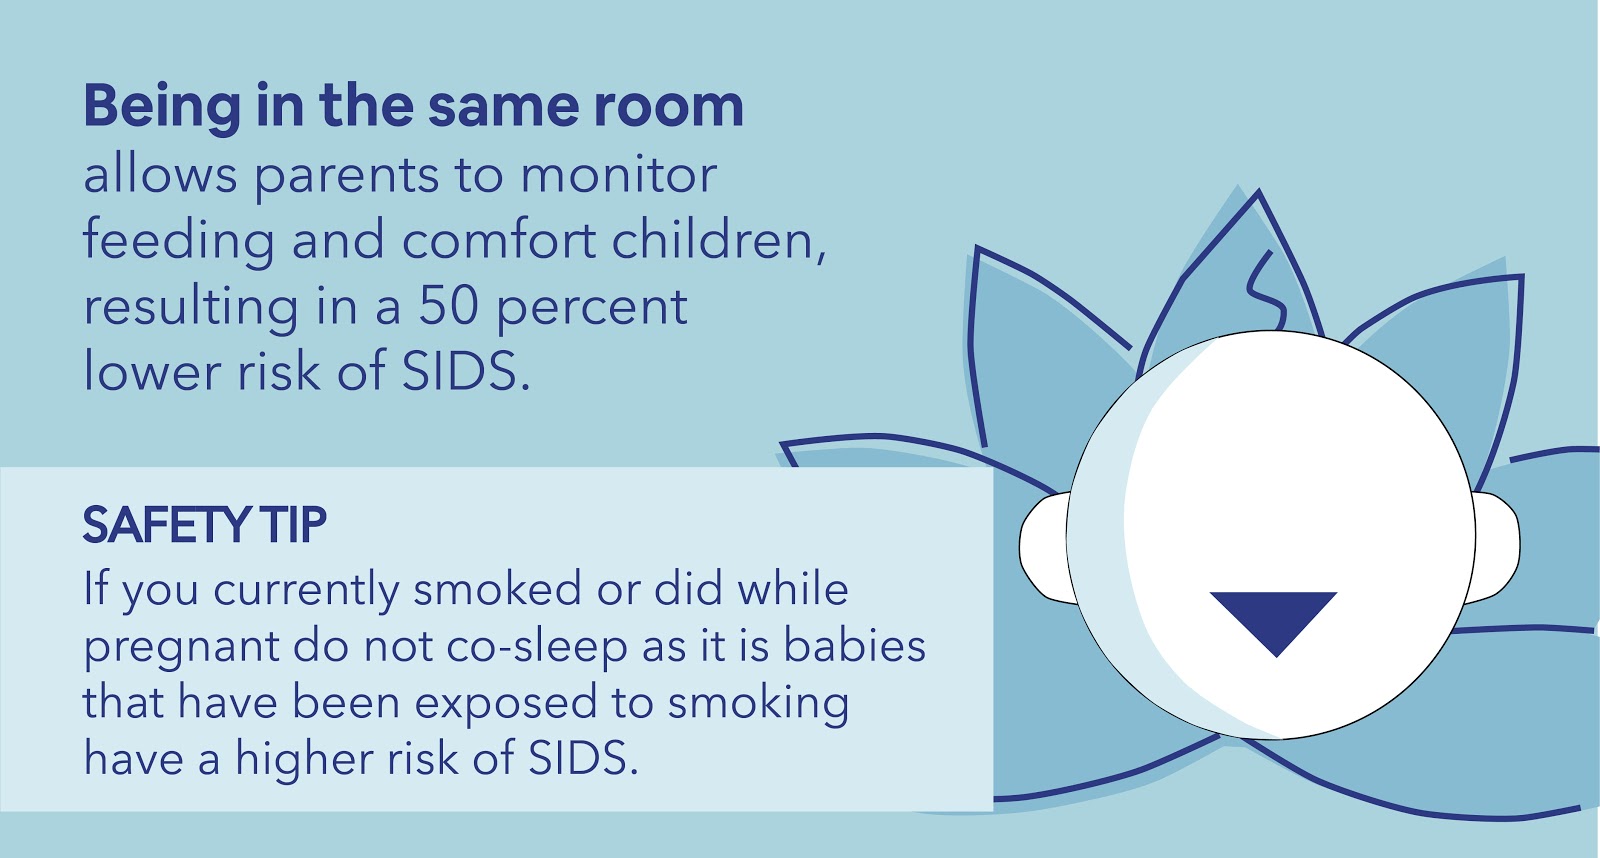 Infographic image with safety tip from Reduces SIDS Risk